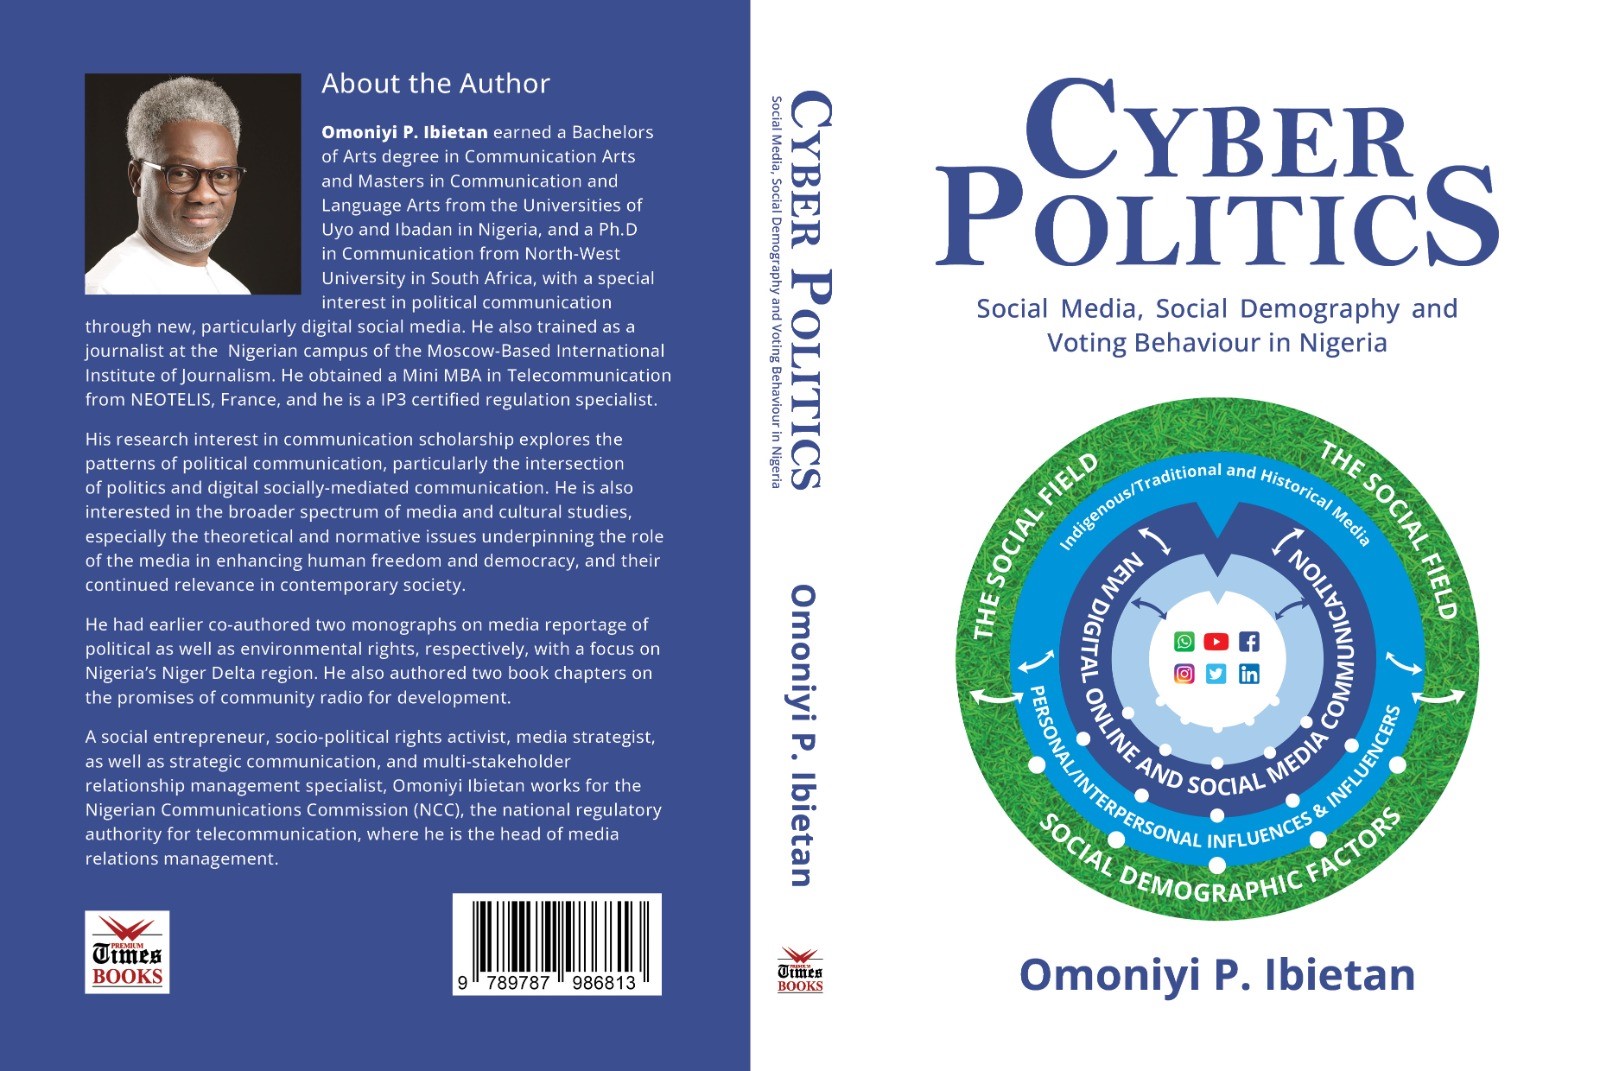 PremiumTimes Books Unveils New Title On Cyber Politics, Nigerian Elections